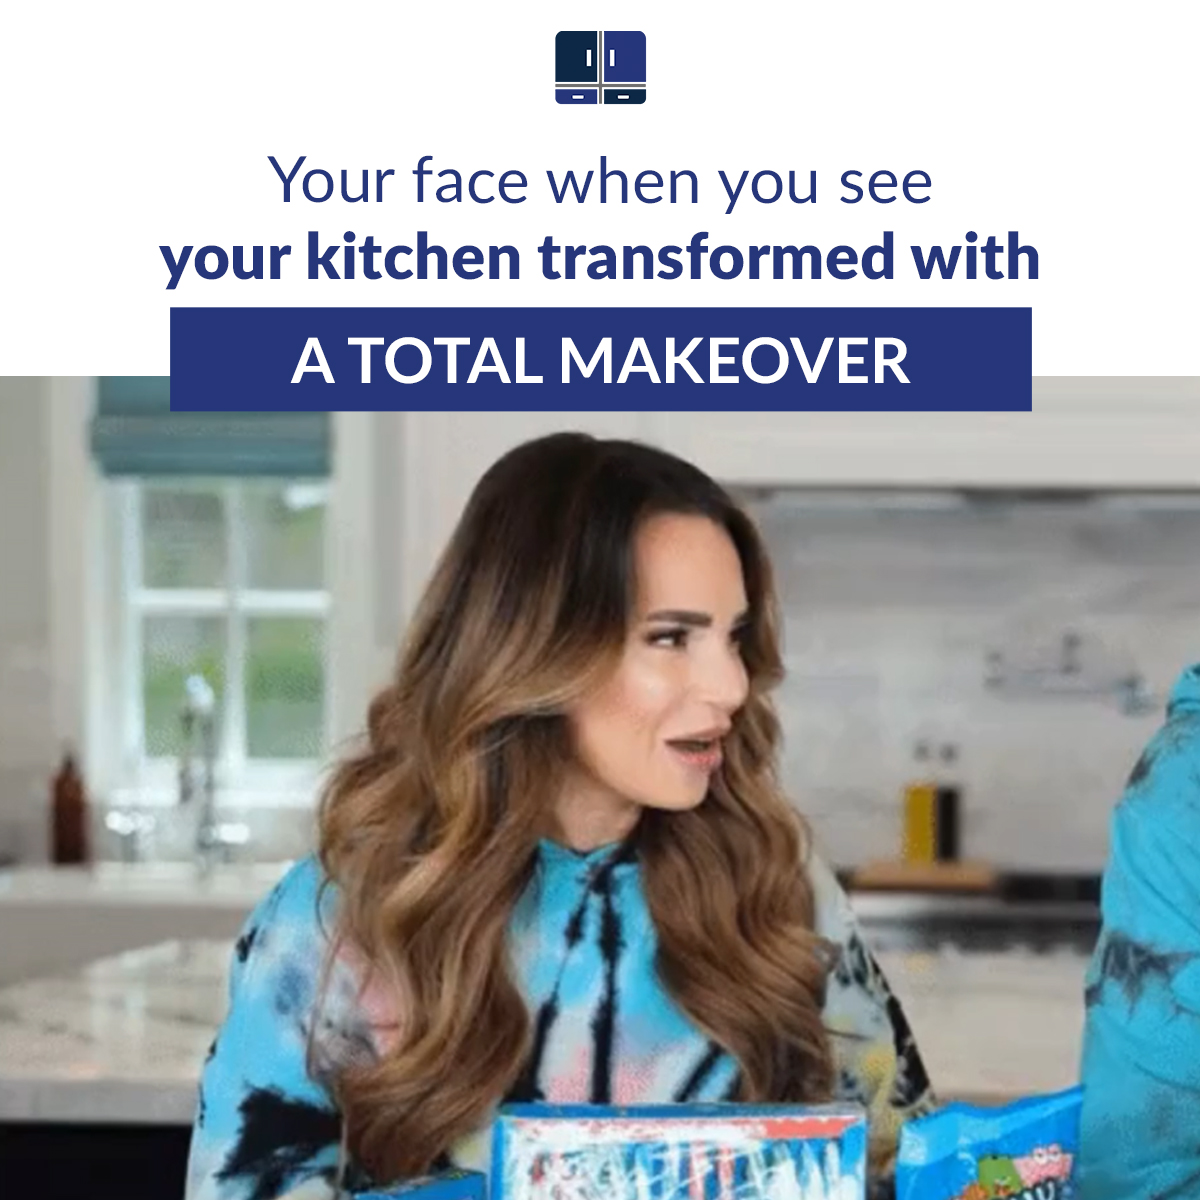 Your face when you see your kitchen transformed with a total makeover